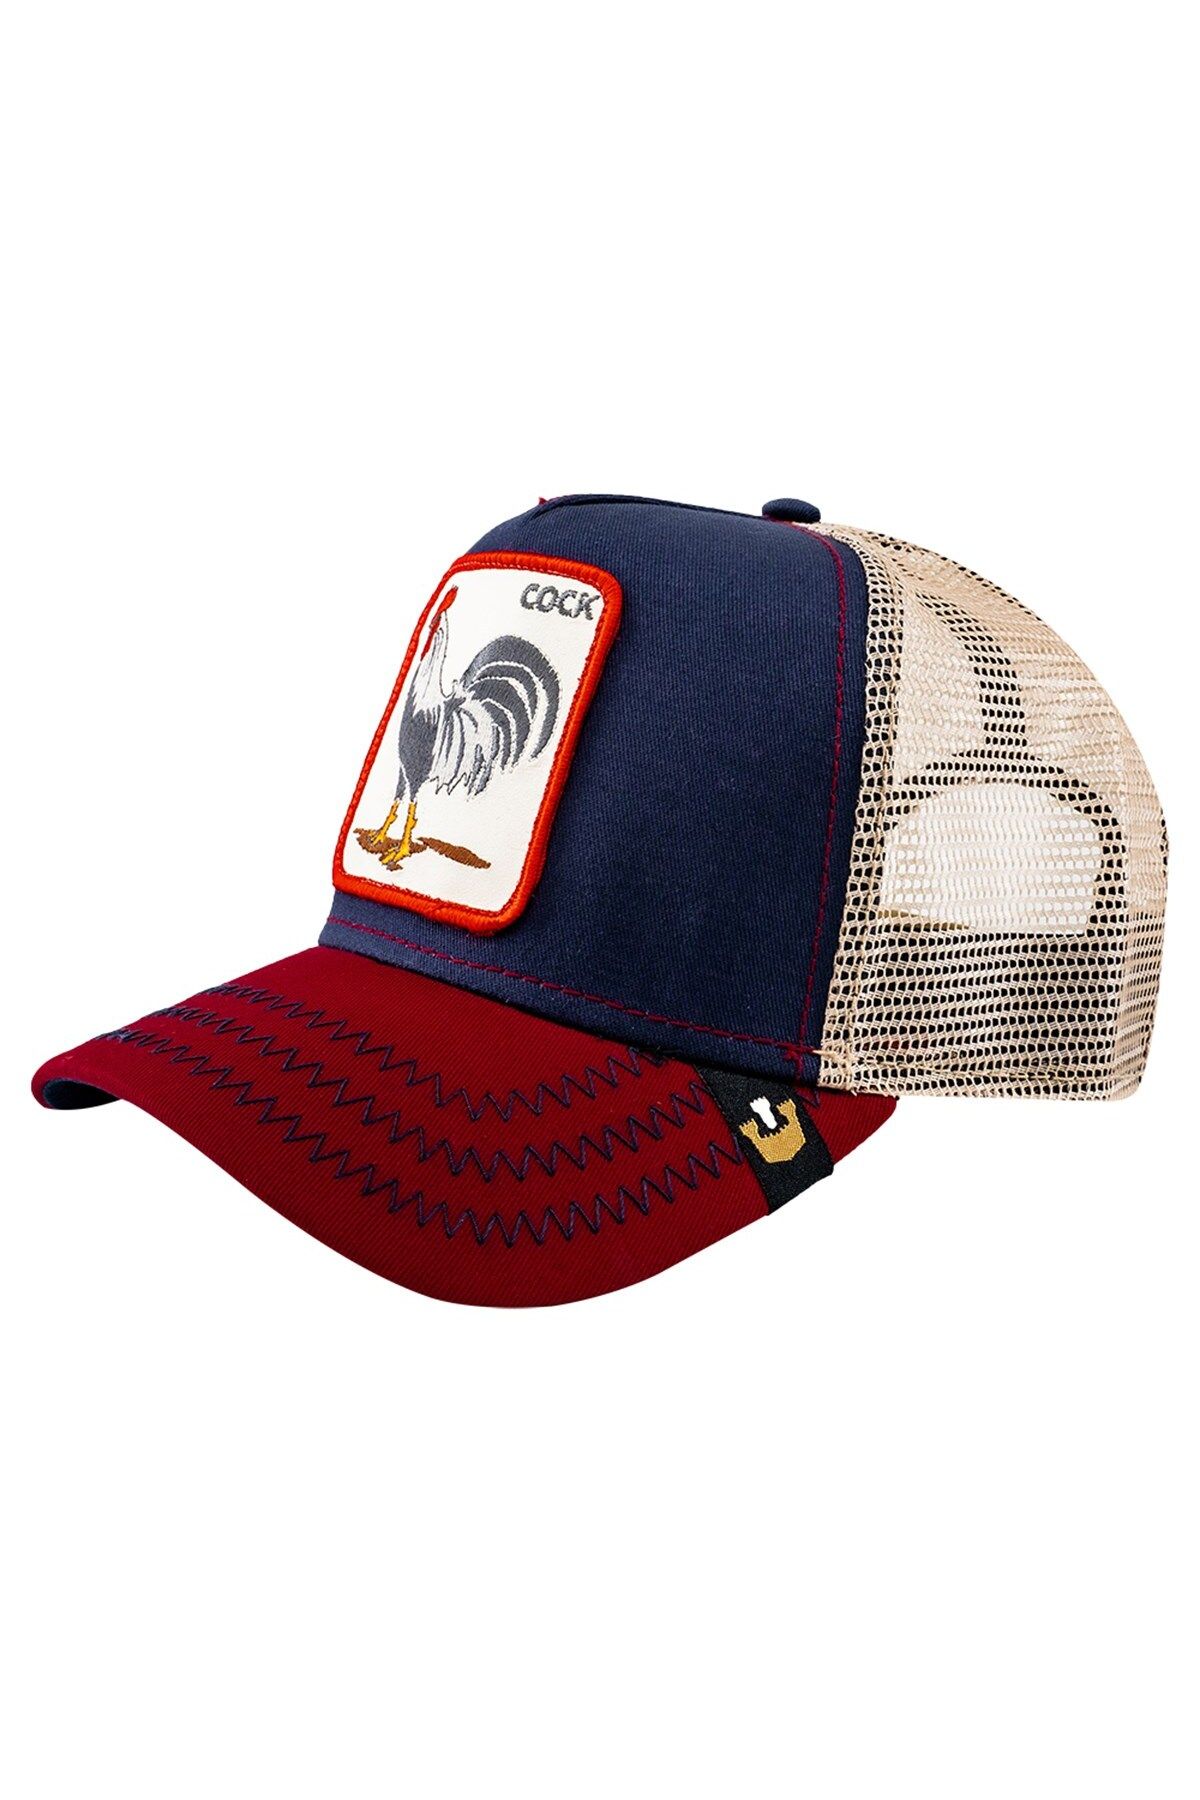 Goorin Bros All American Rooster 101-2548